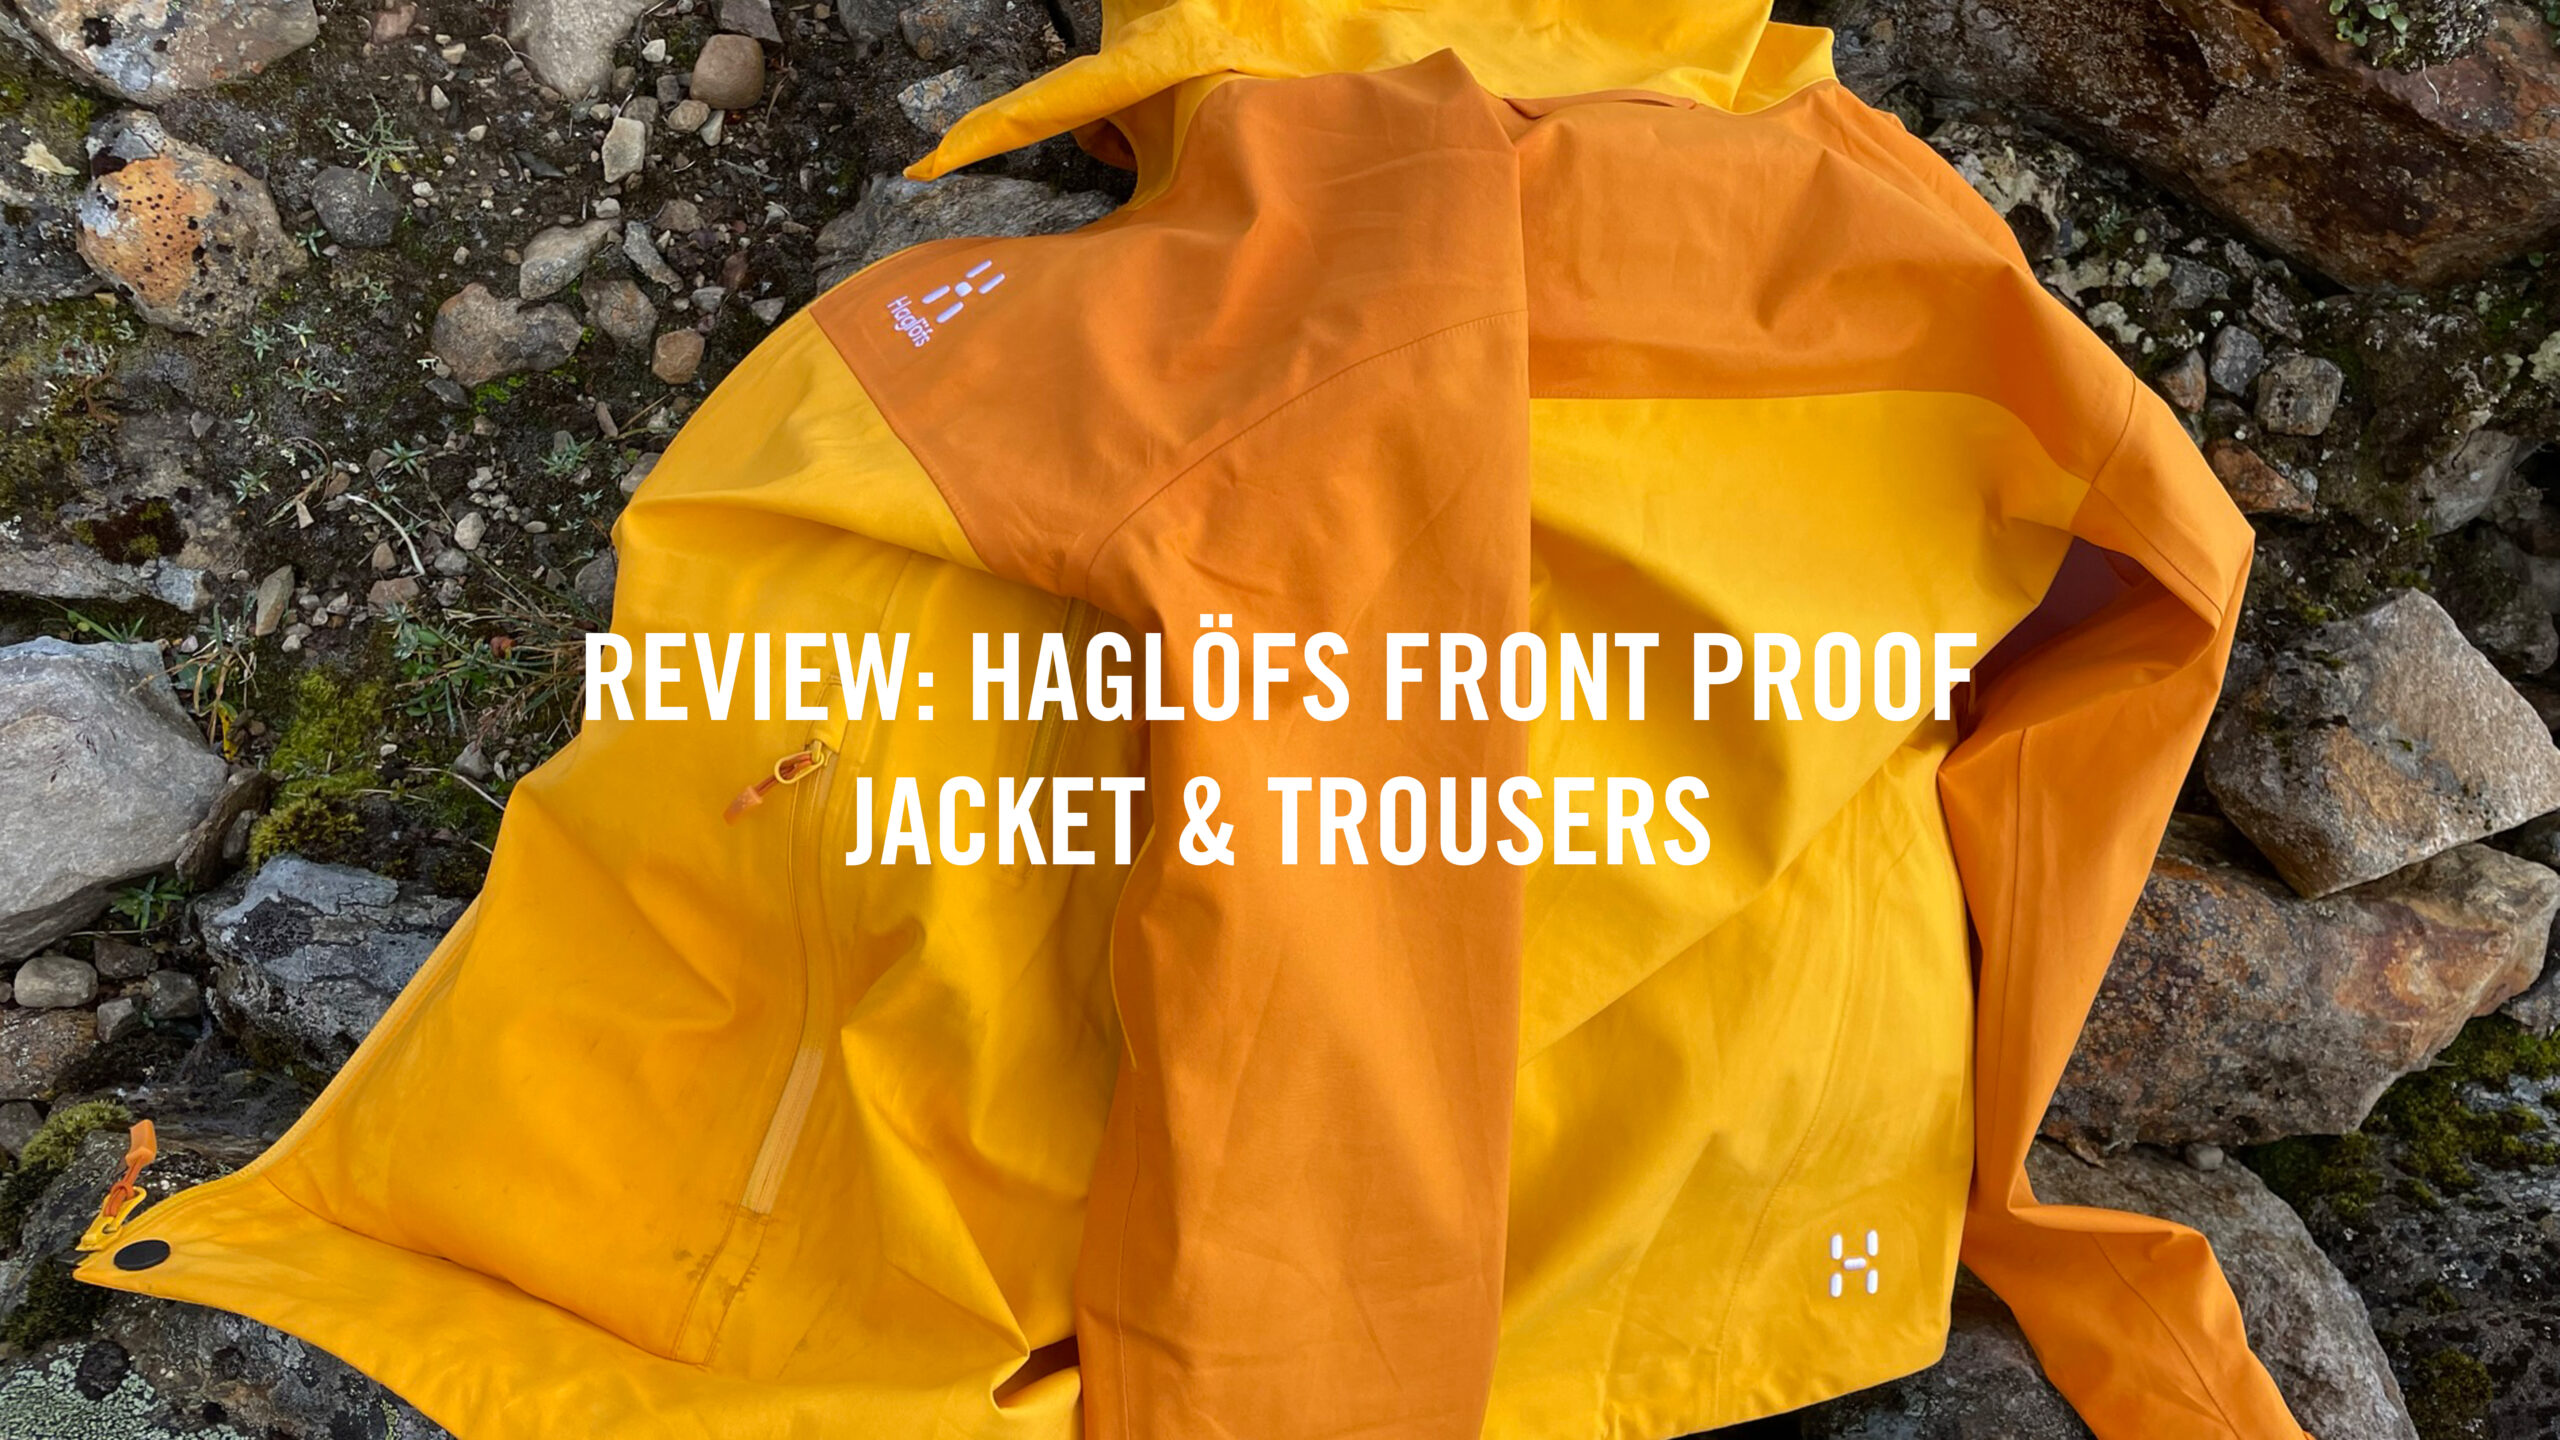 Review: Haglöfs Front Proof Jacket & Trousers